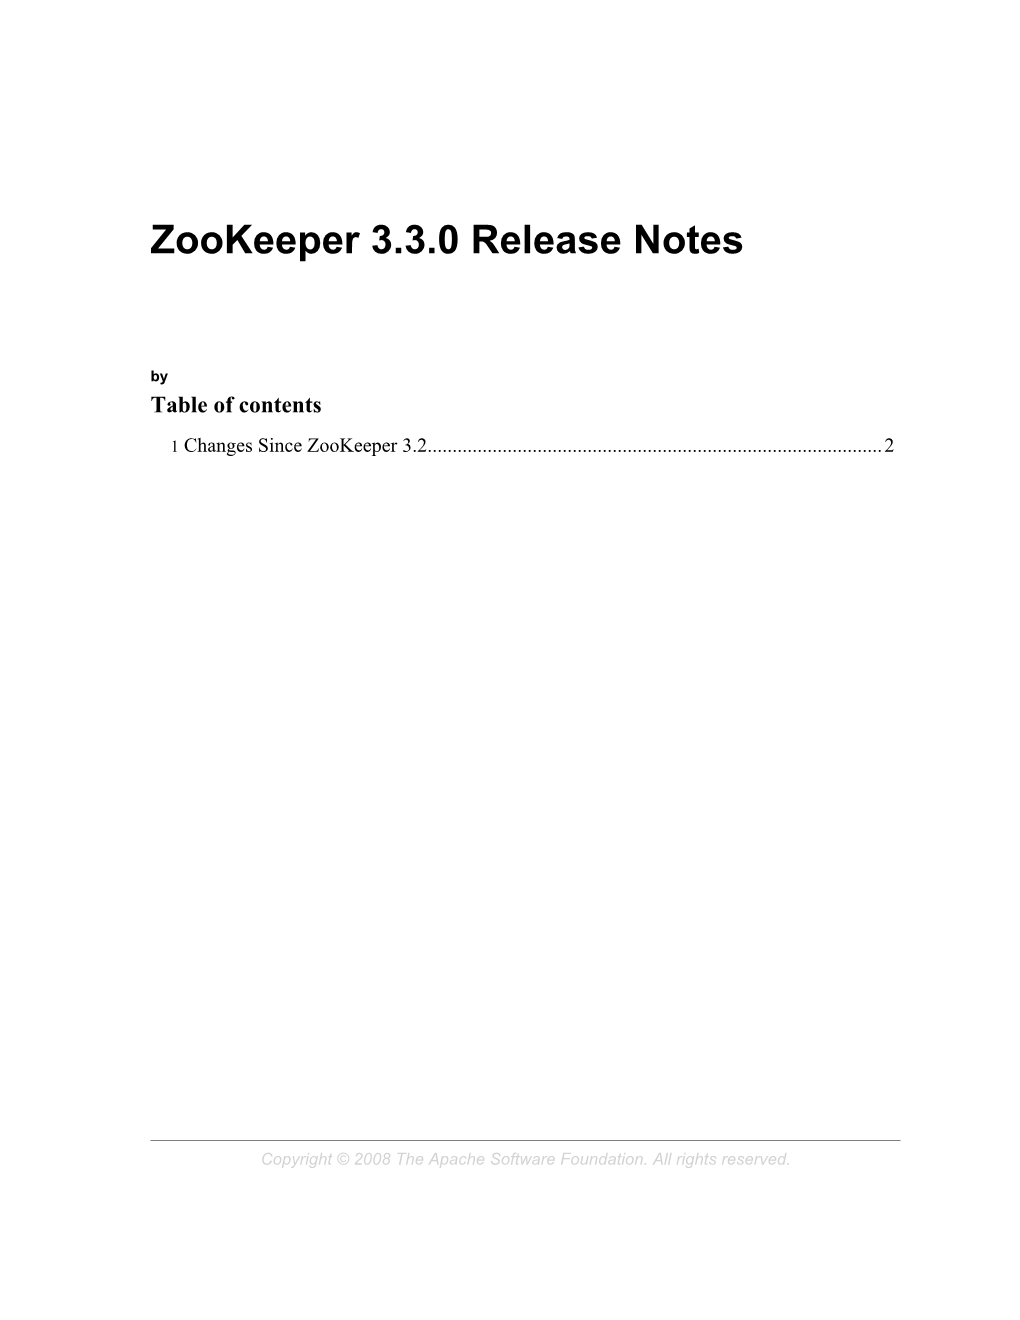 Zookeeper 3.3.0 Release Notes